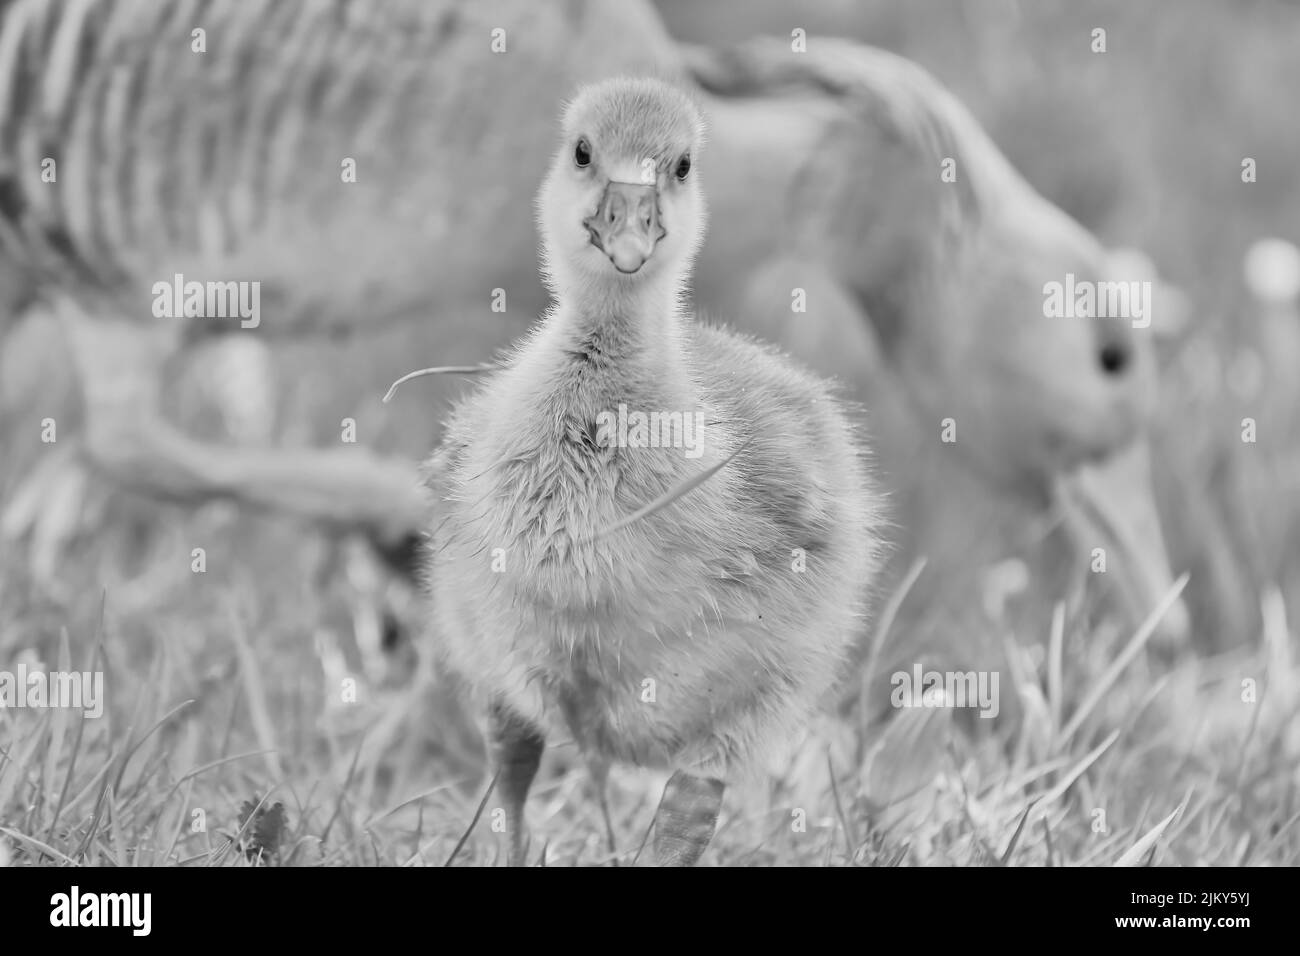 A grayscale shot of a young gosling foraging on a field against a blurry adult goose background Stock Photo